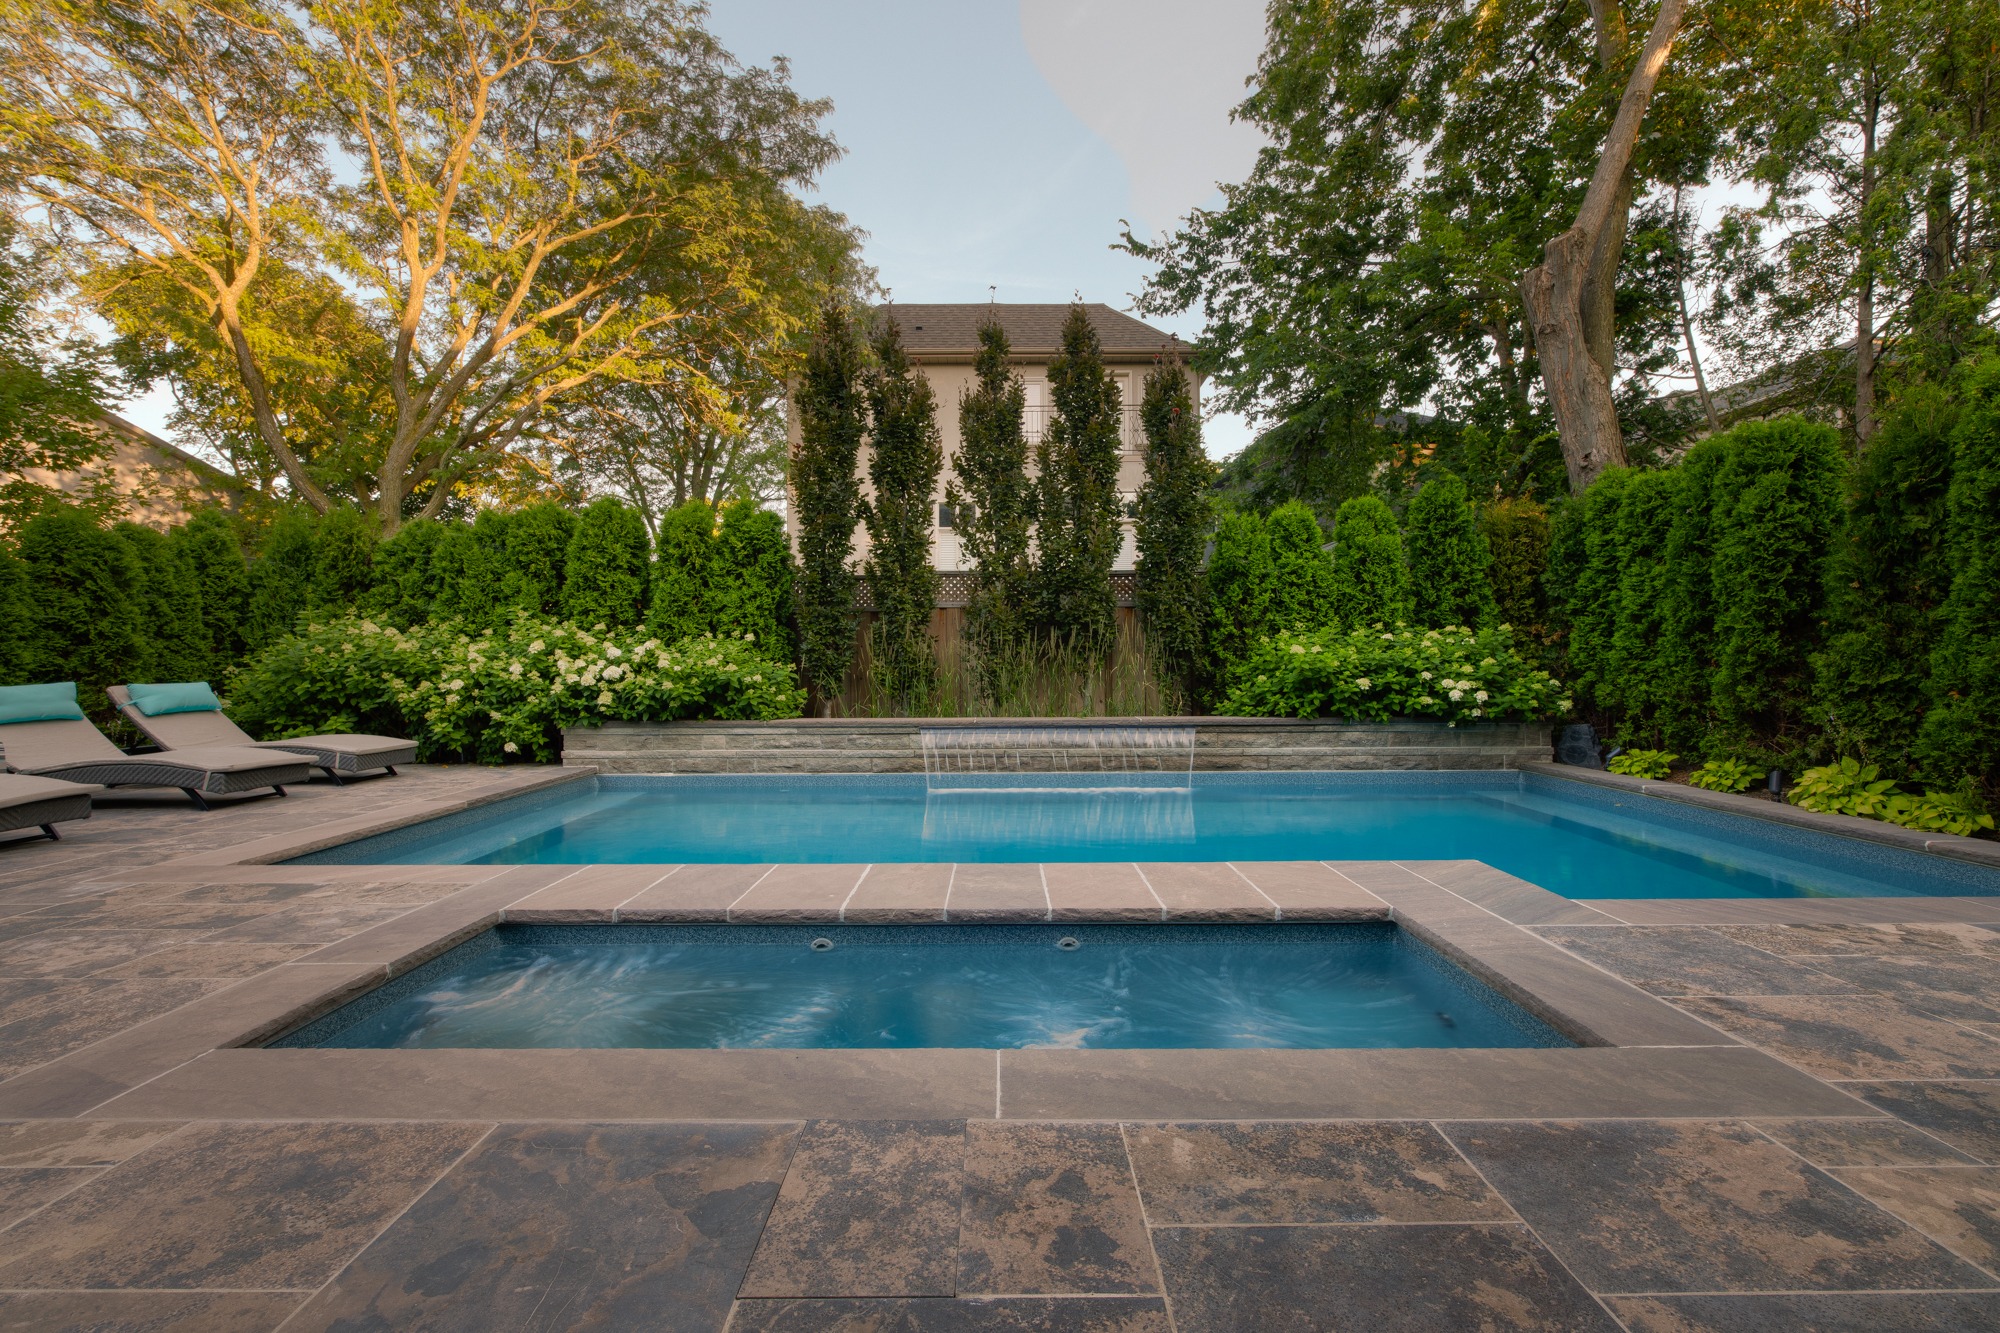 A serene backyard featuring a rectangular swimming pool with an integrated hot tub, surrounded by lush greenery, loungers, and a stone patio at dusk.